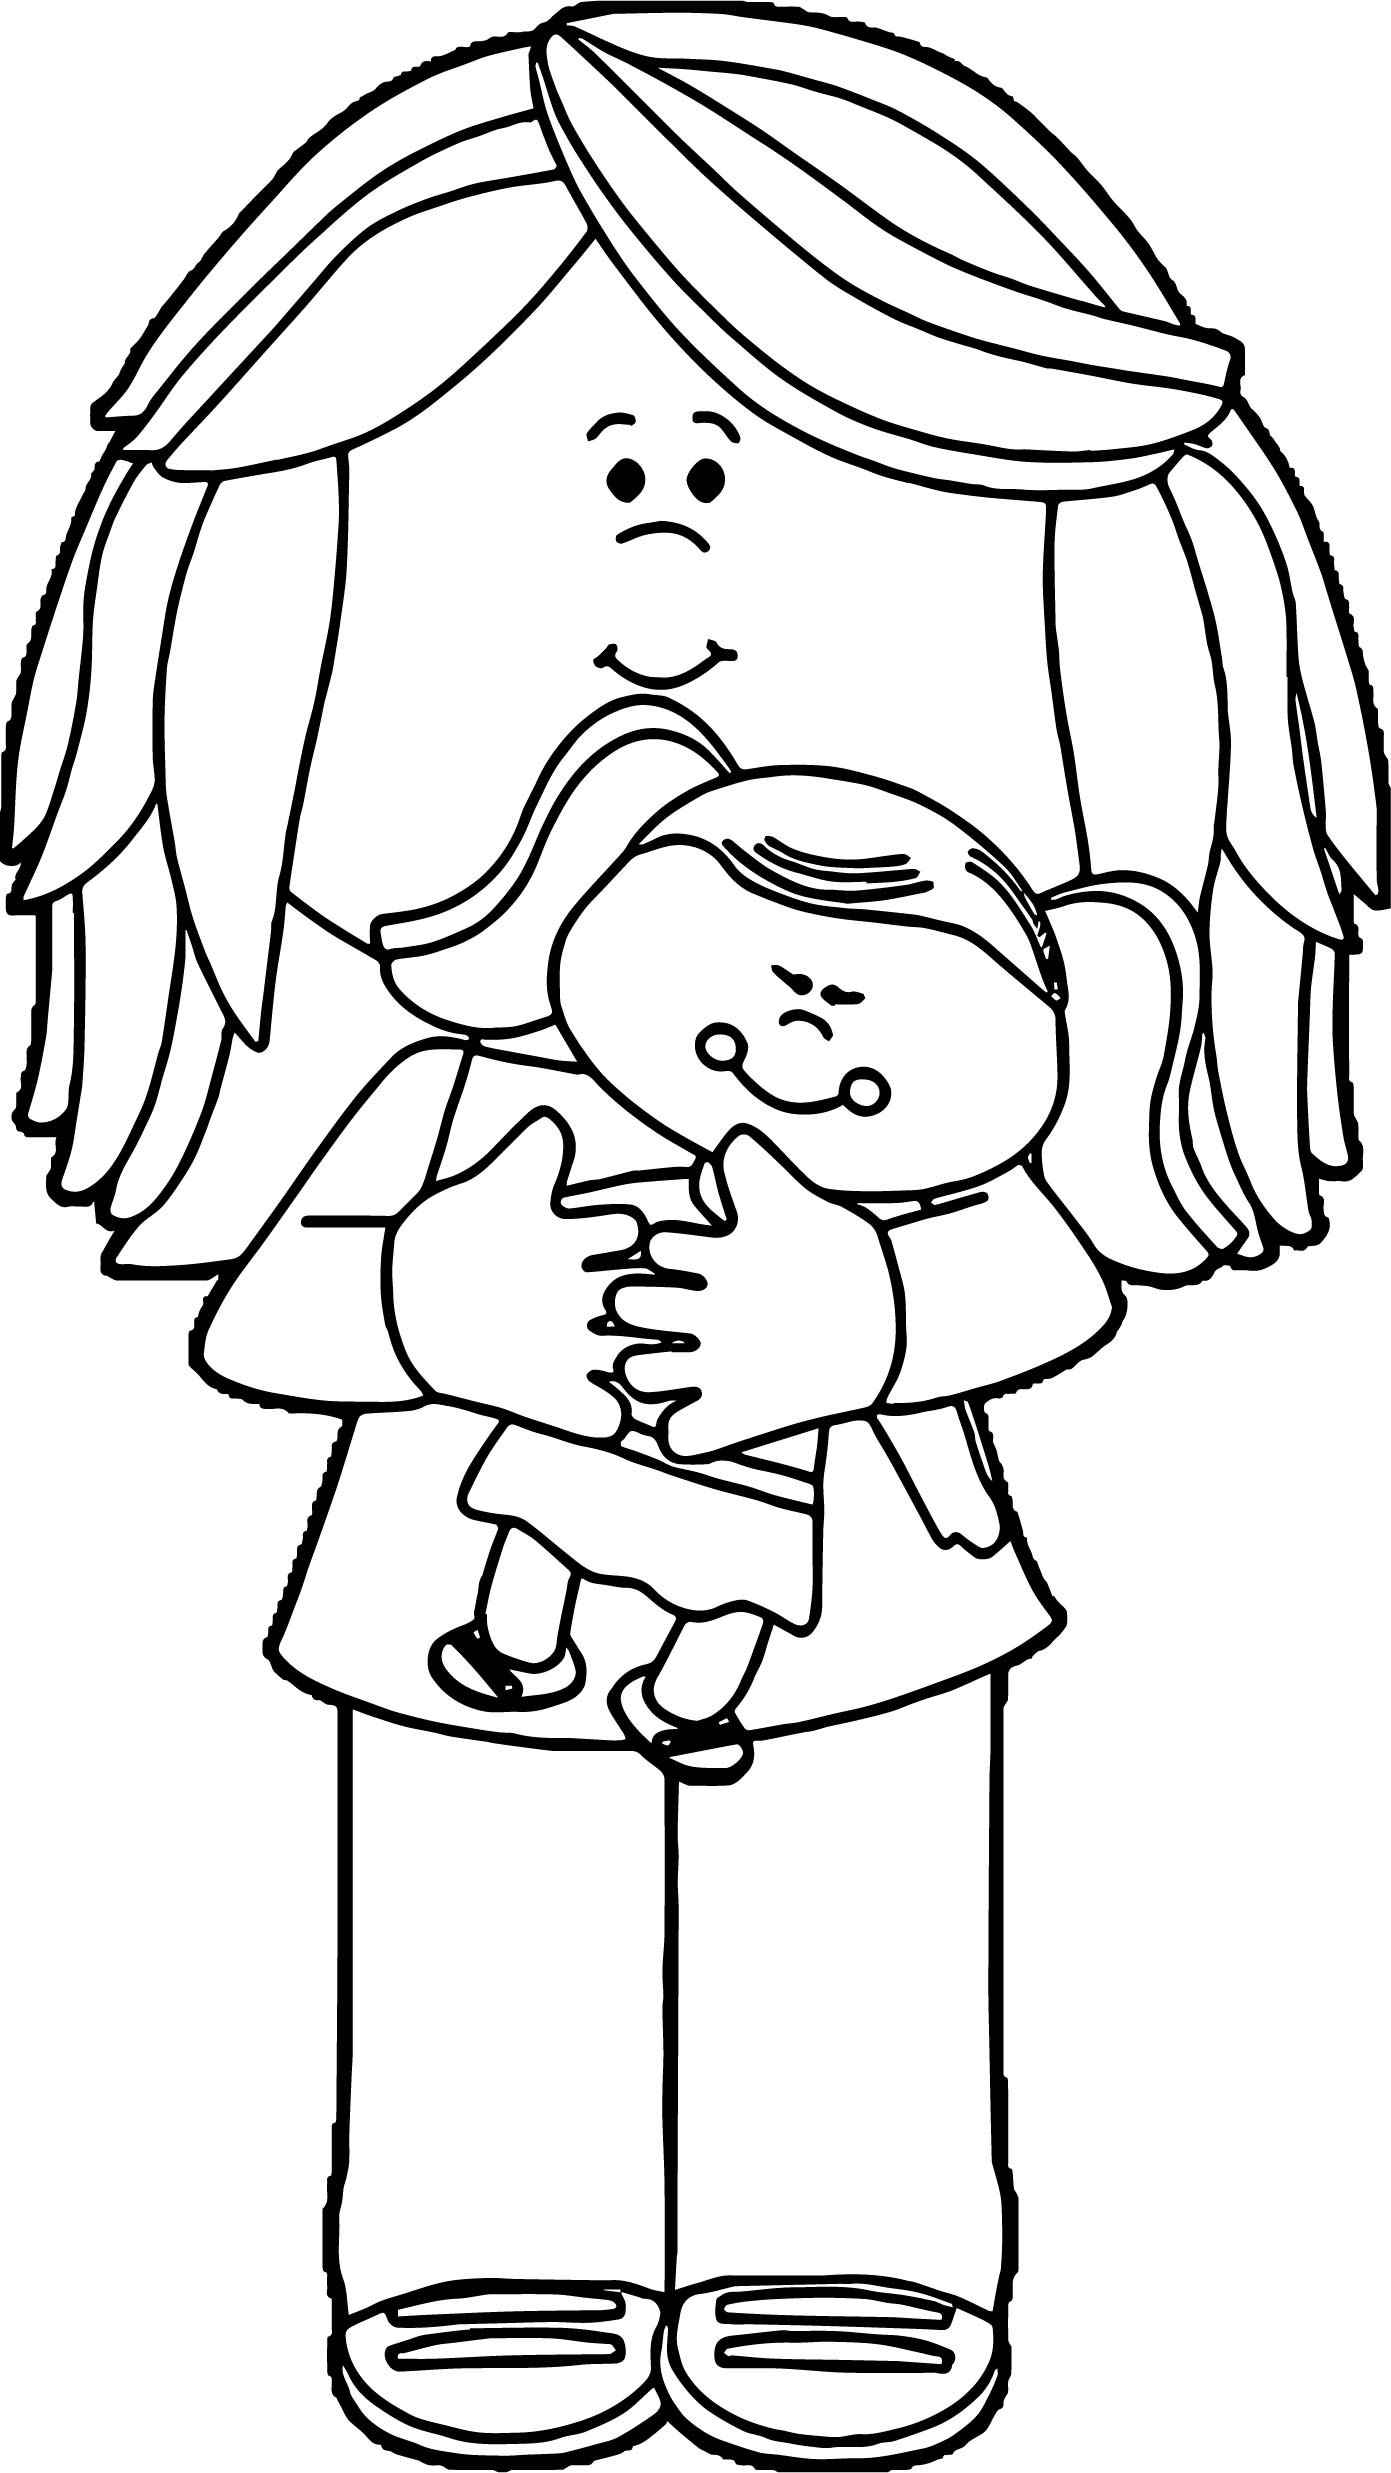 Baby Doll Coloring Pages
 Little Girl Holding Baby Doll Coloring Page